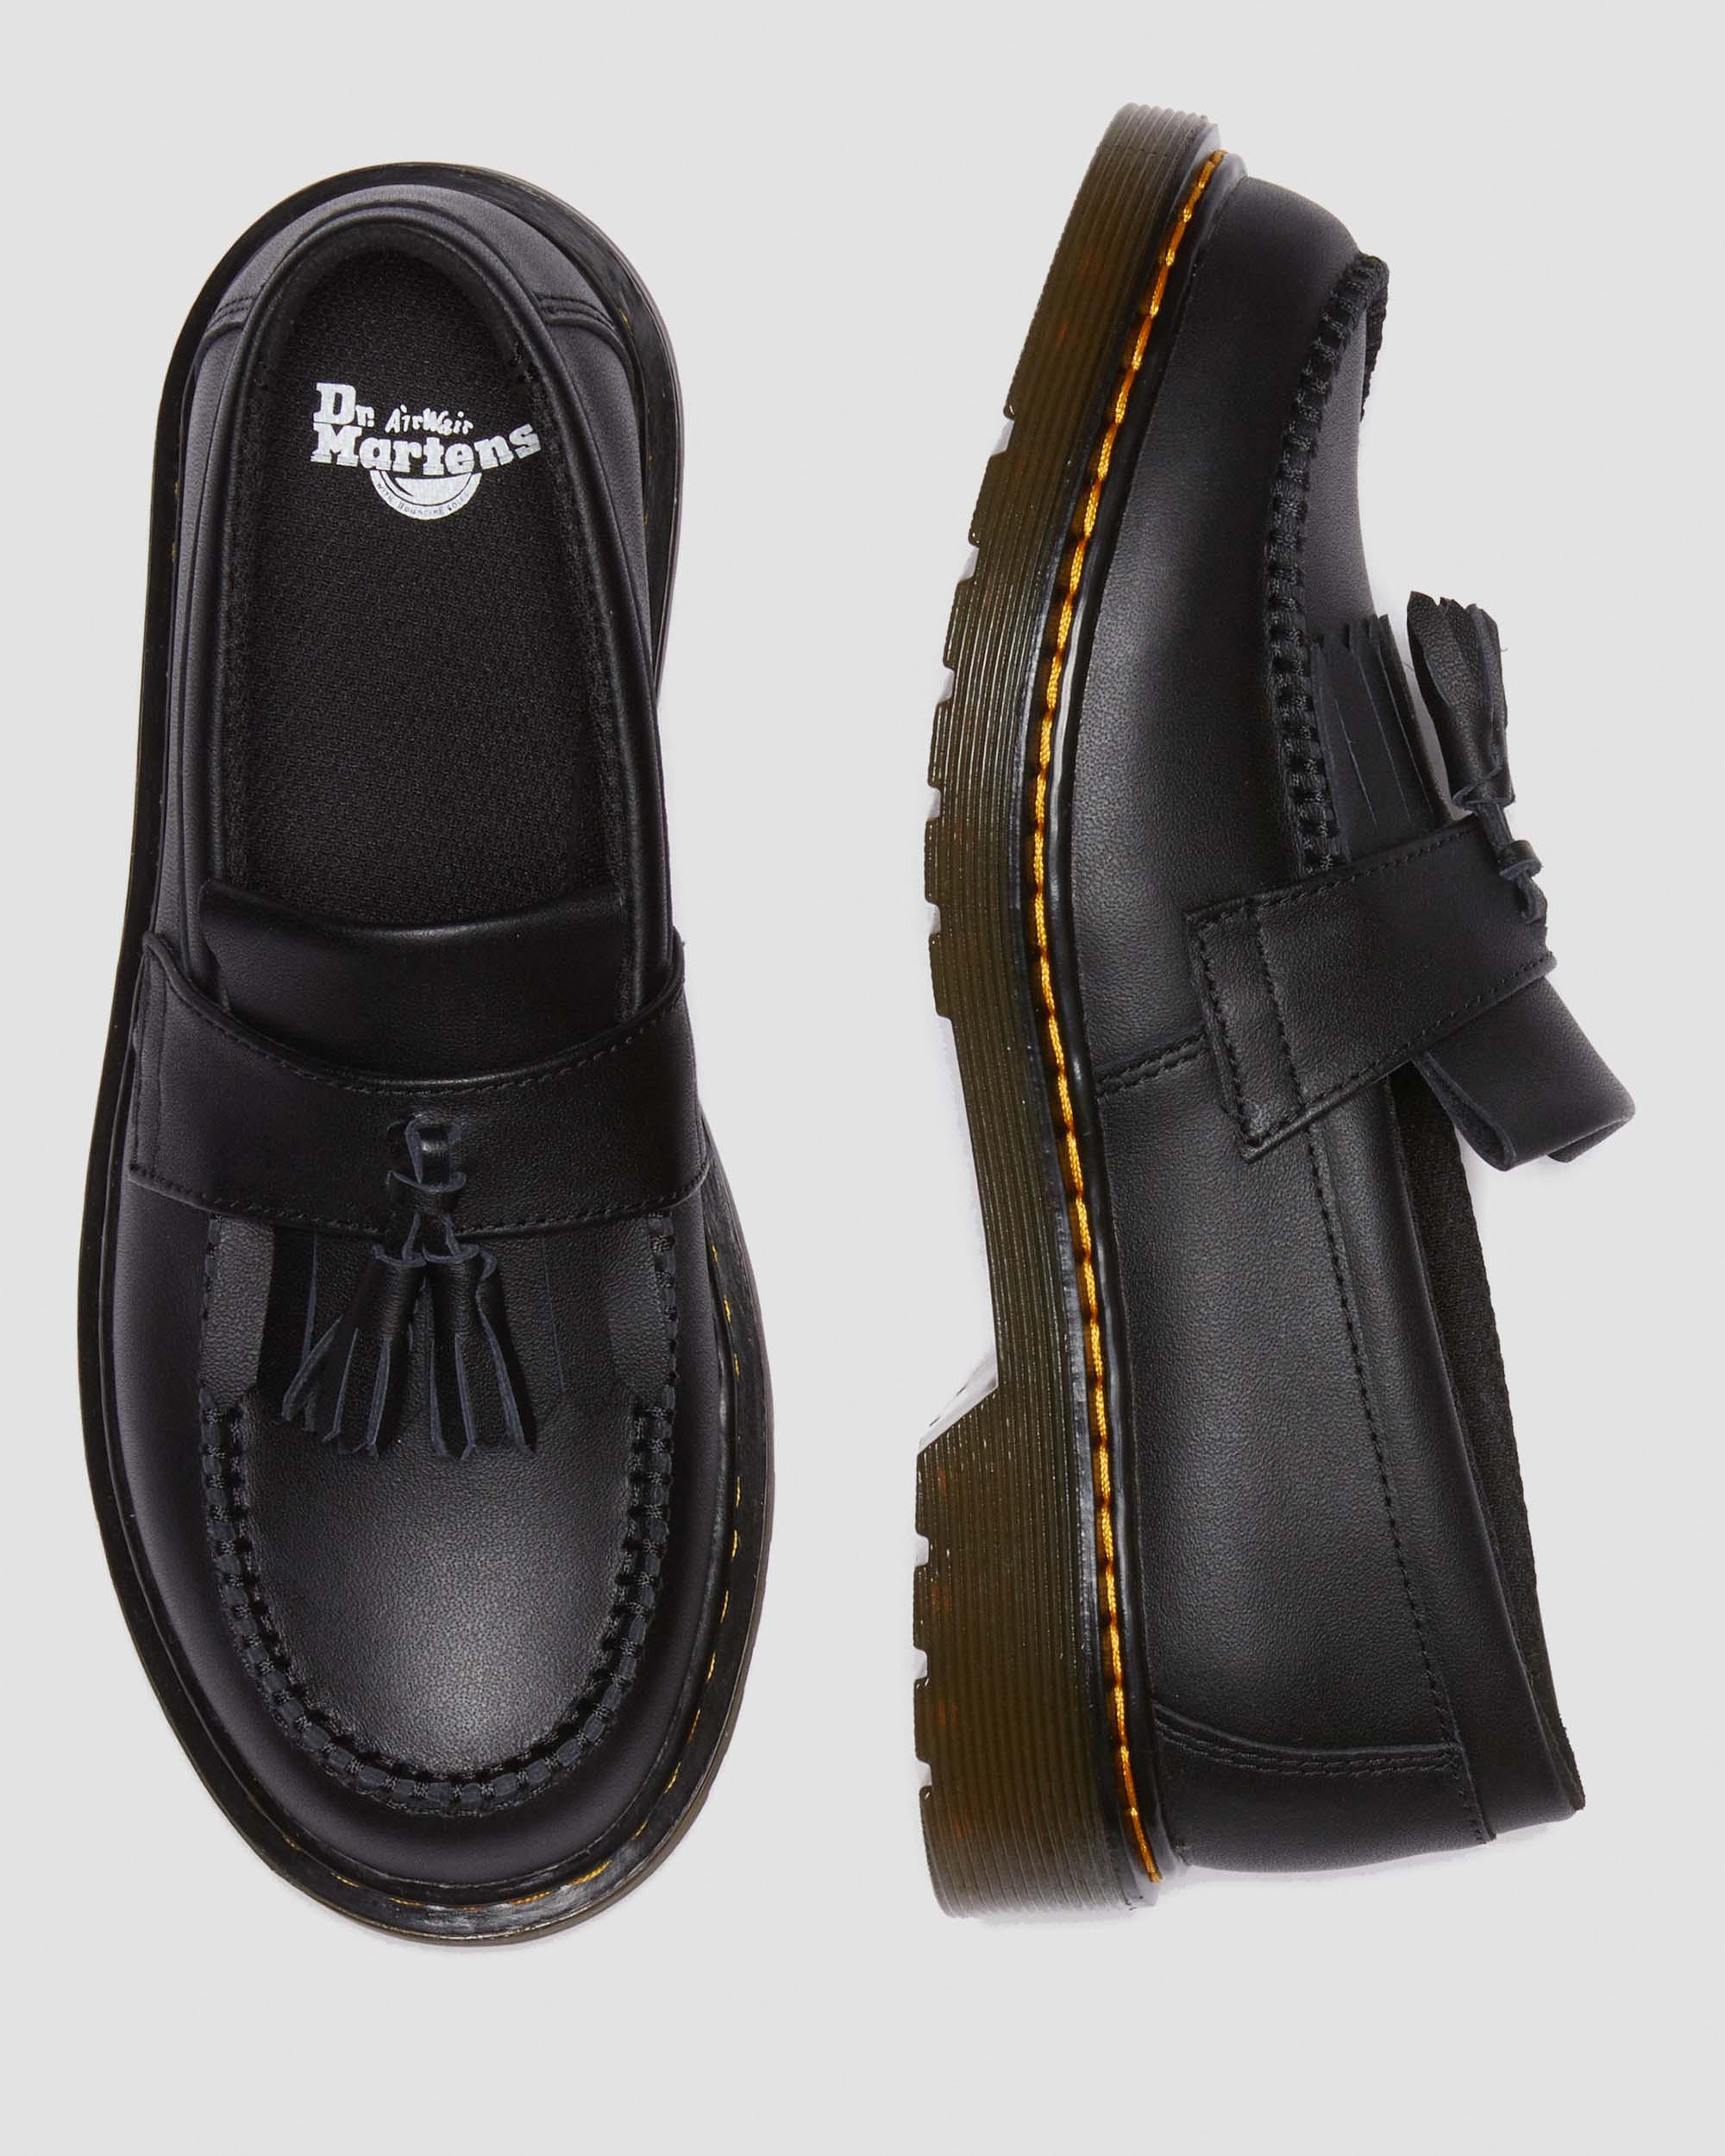 Junior Adrian Leather Loafers in Black